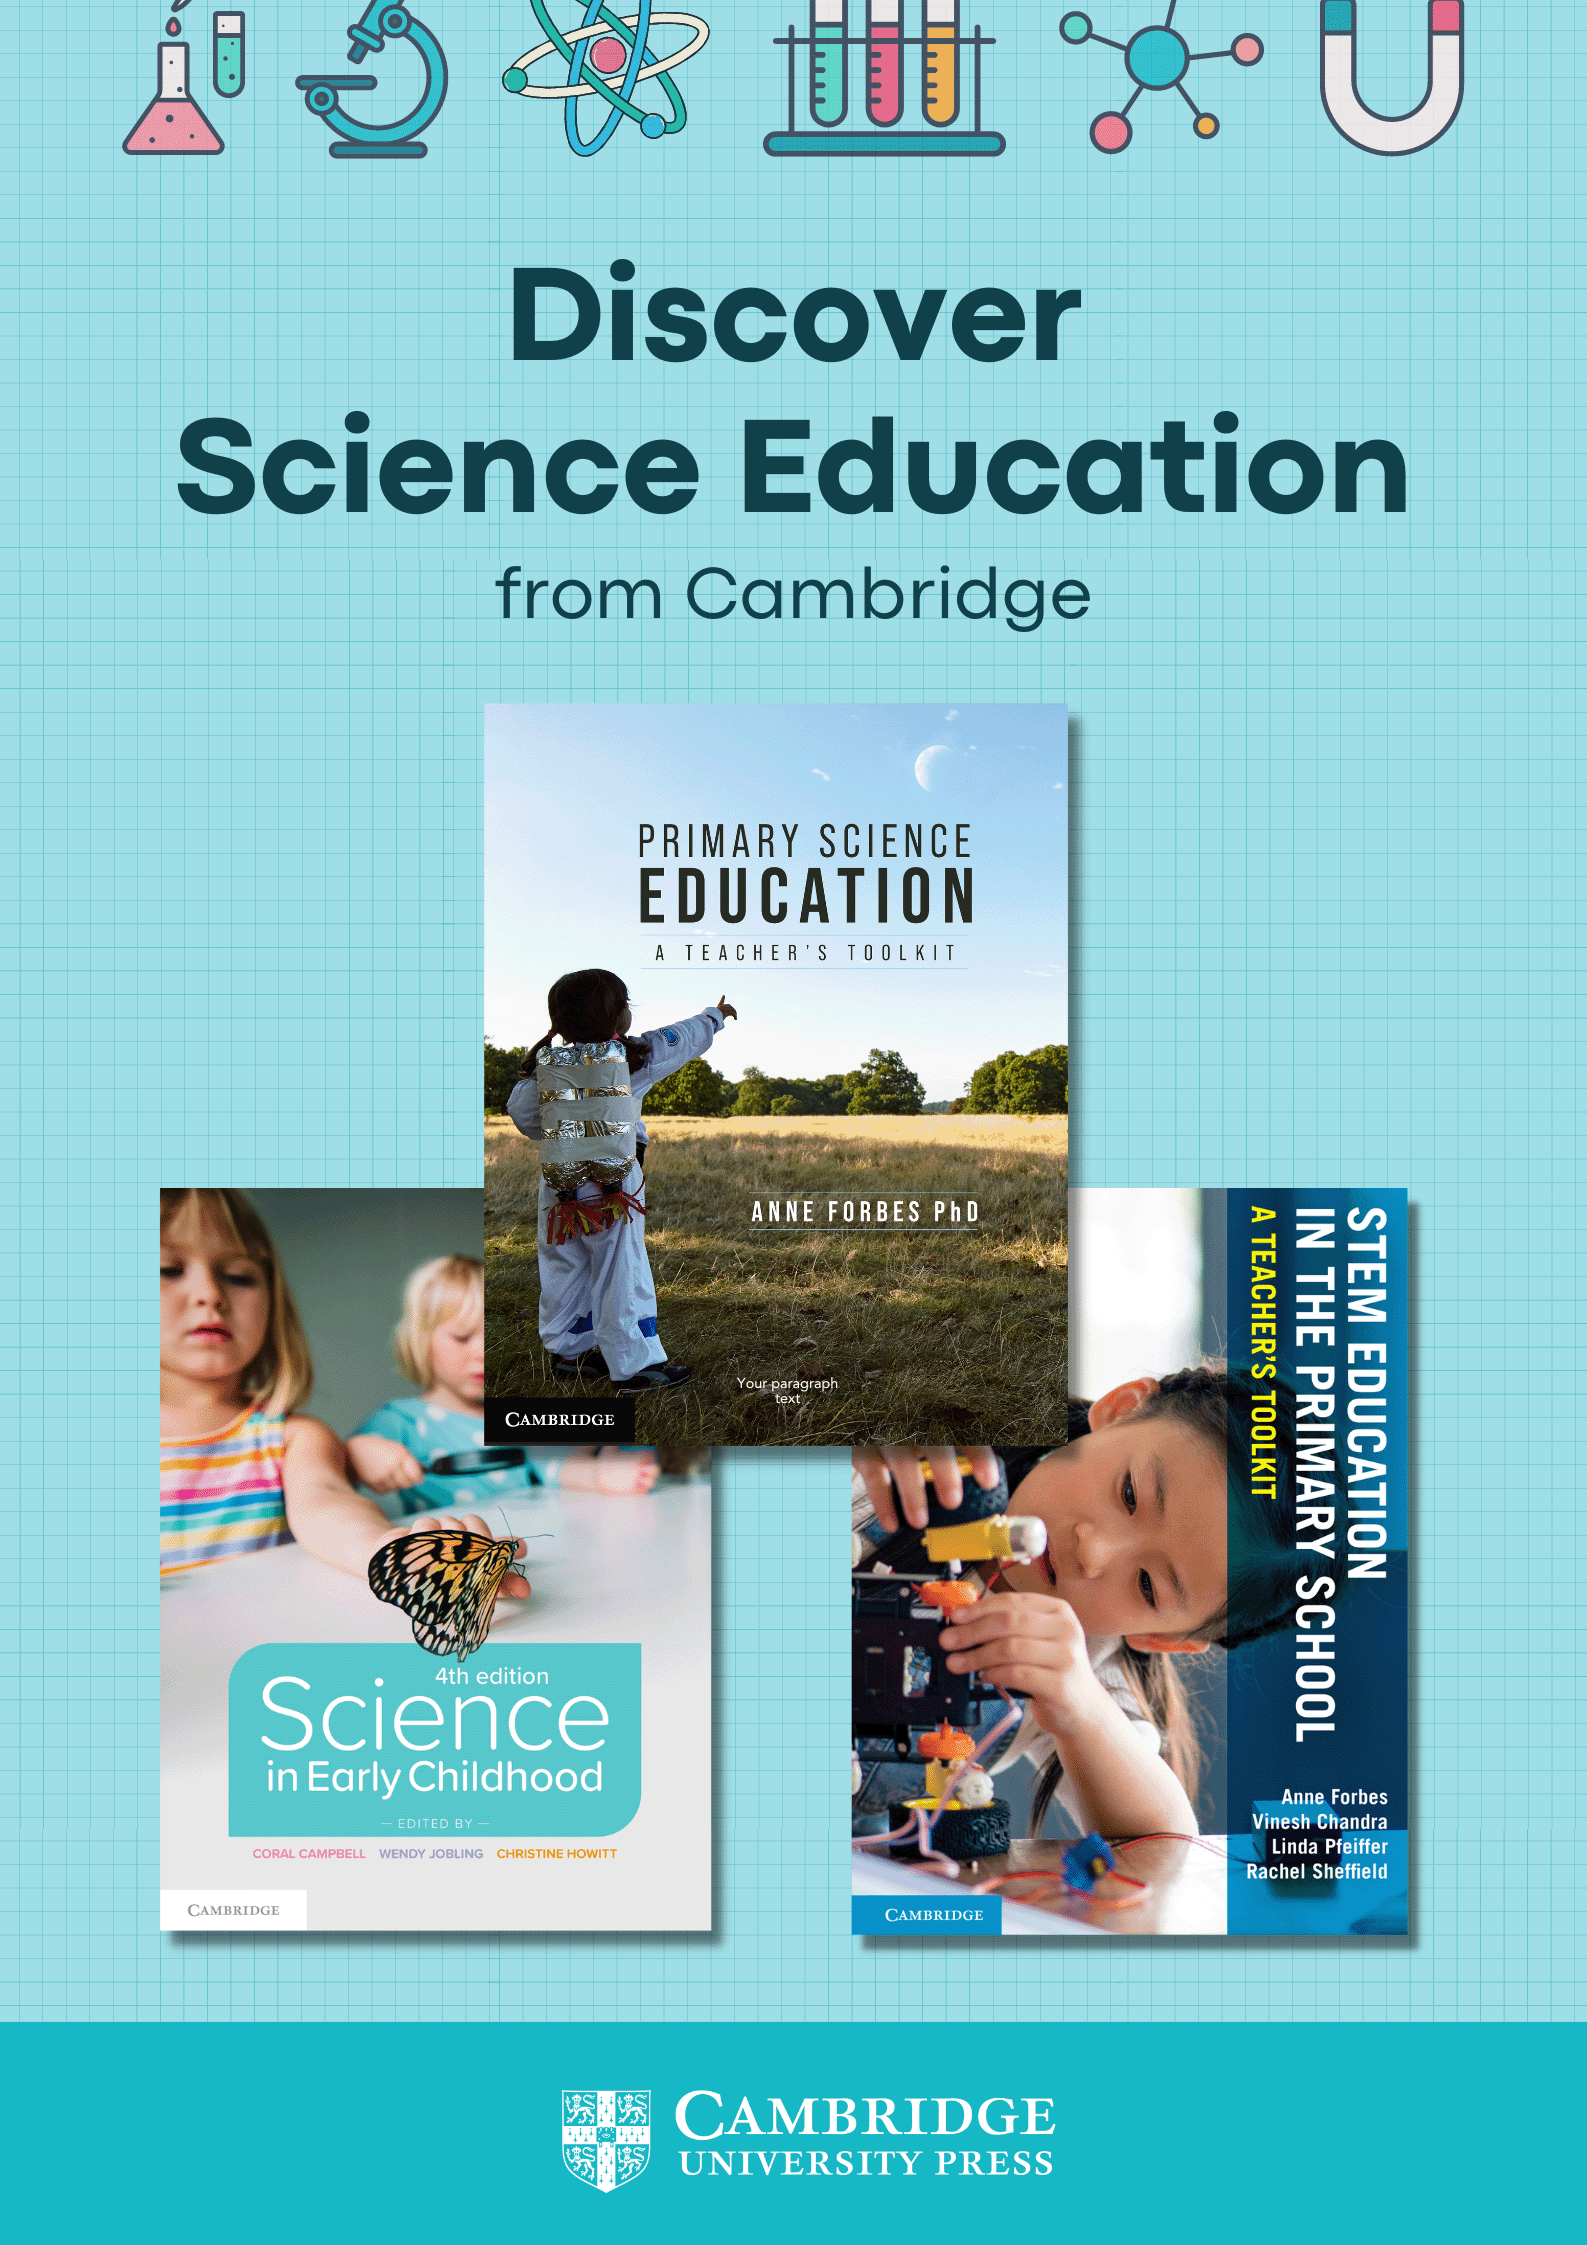 AUS - Forbes - Discover Science Education